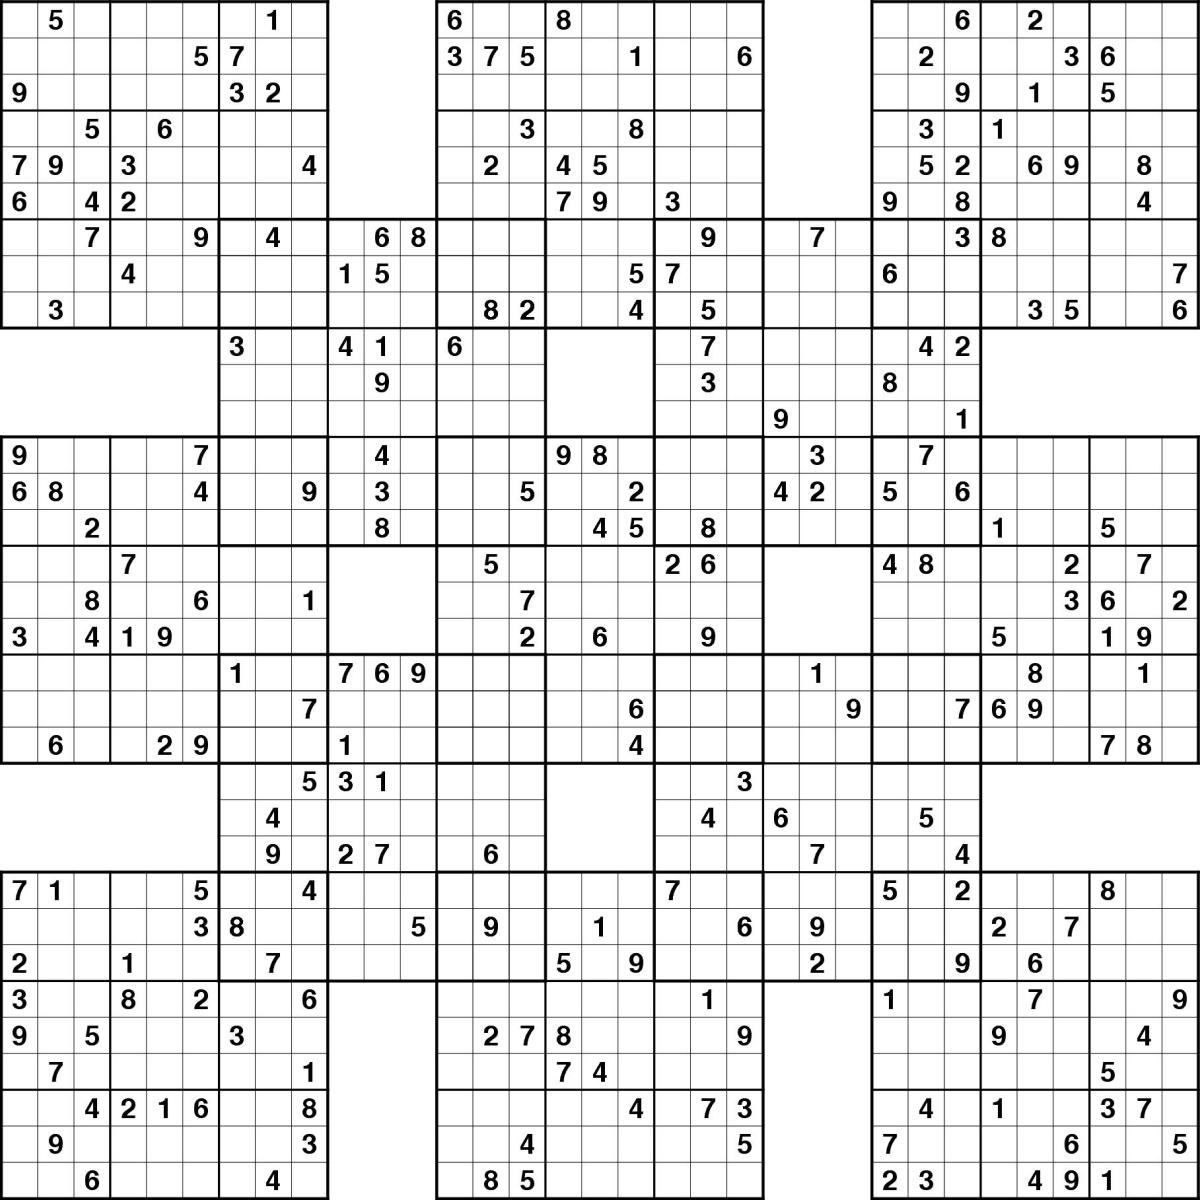 Samurai sudoku is like doing multiple puzzles at once. This one features 13 grids!